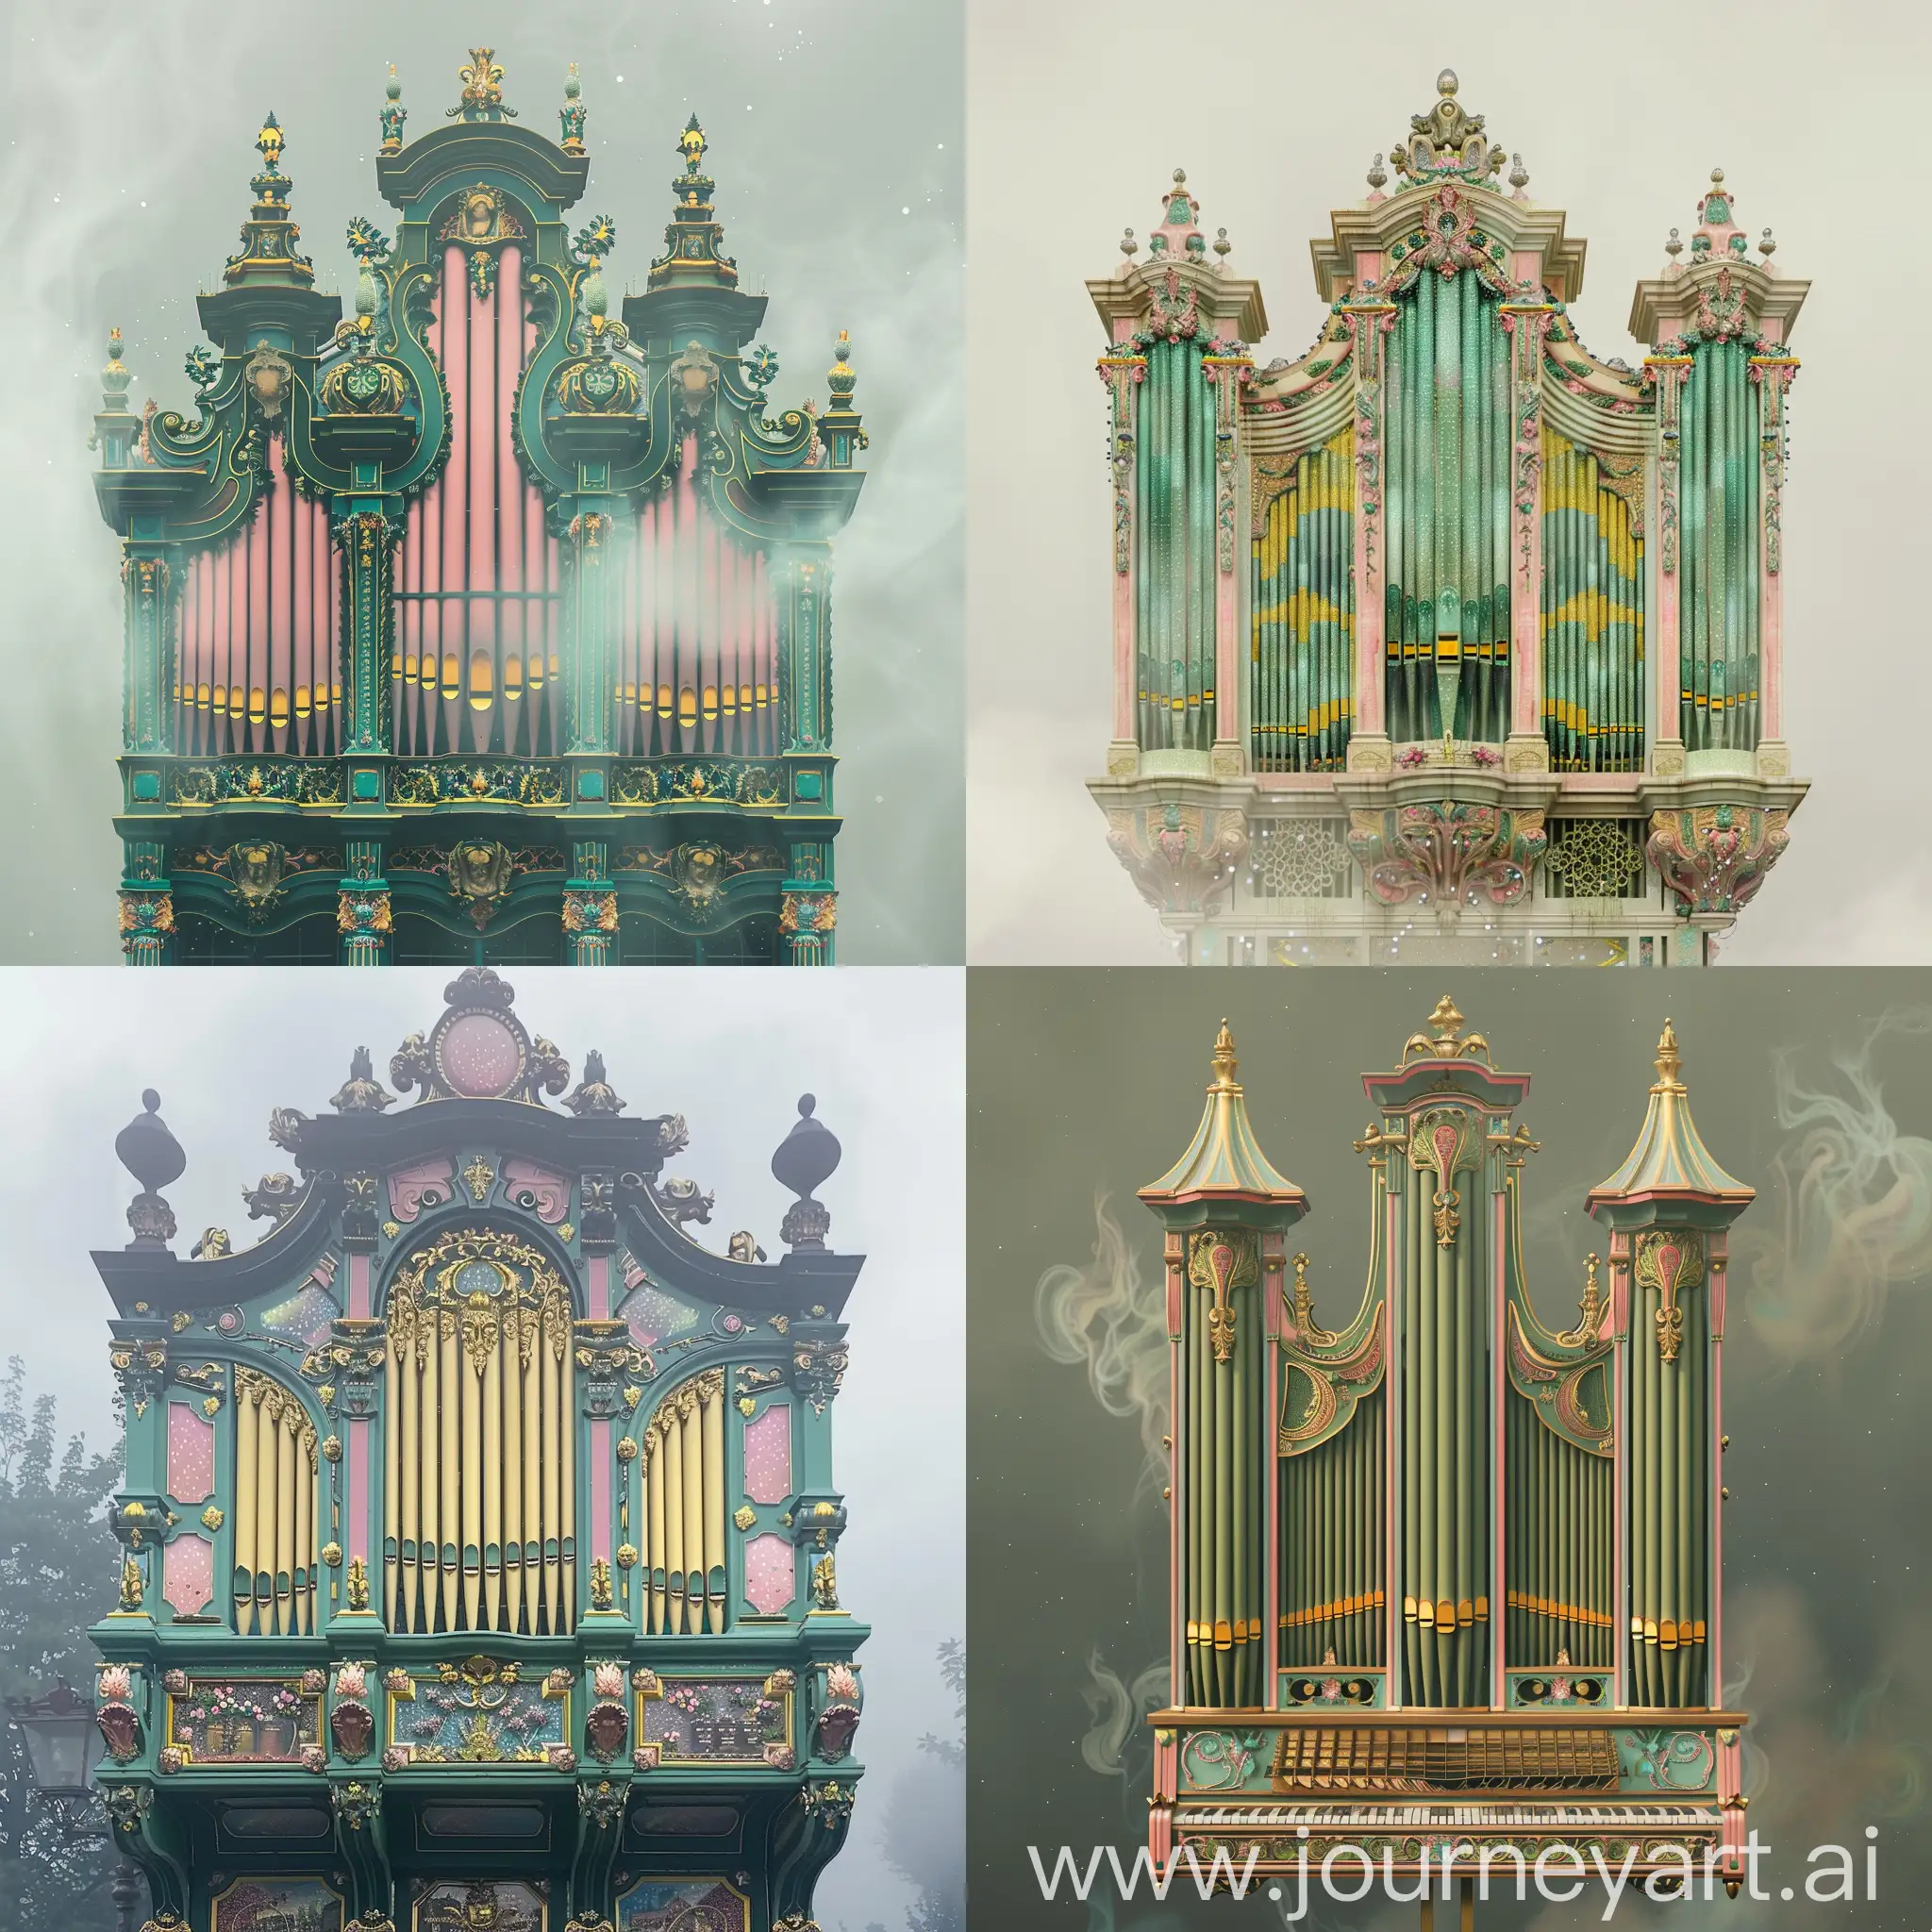 A Dutch street organ in misty spring colors of green, pink, blue, yellow, soft ivory, smoke fractal, moody, intricate, realistic twinkling sparkly, filigree